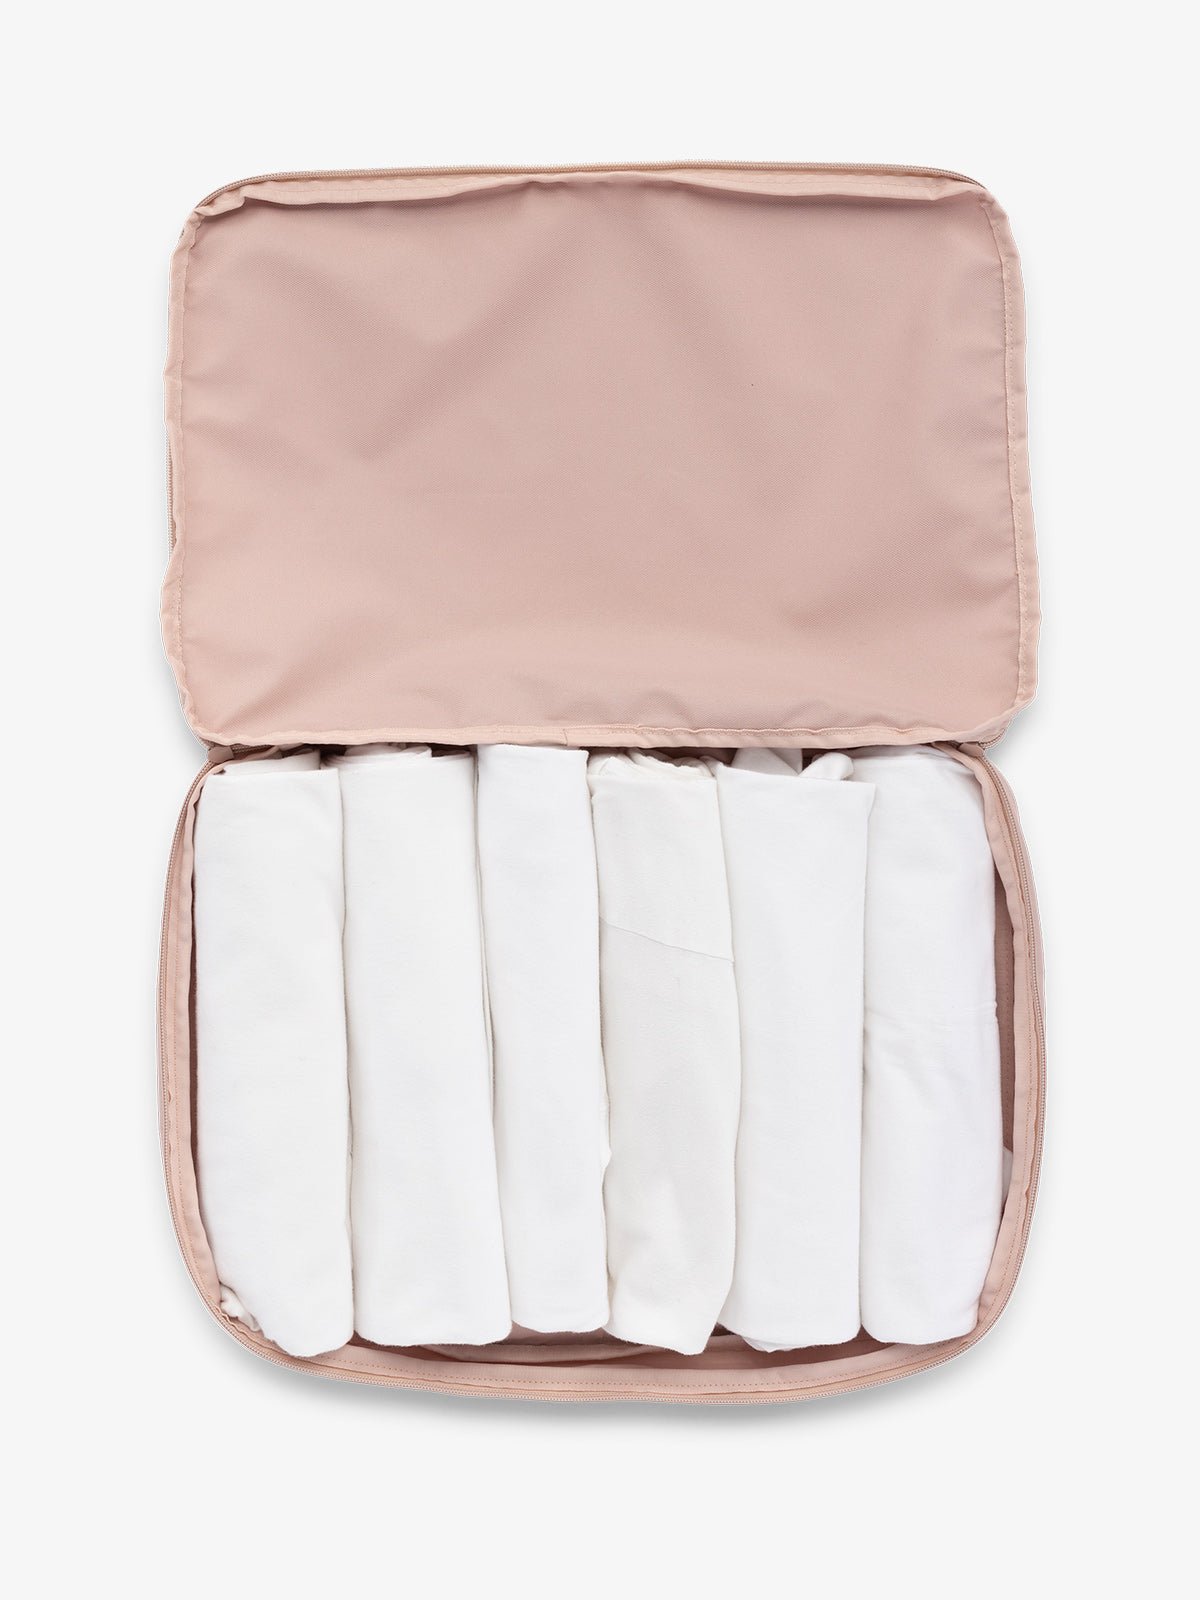 CALPAK large packing cubes for travel made with durable material in pink sand